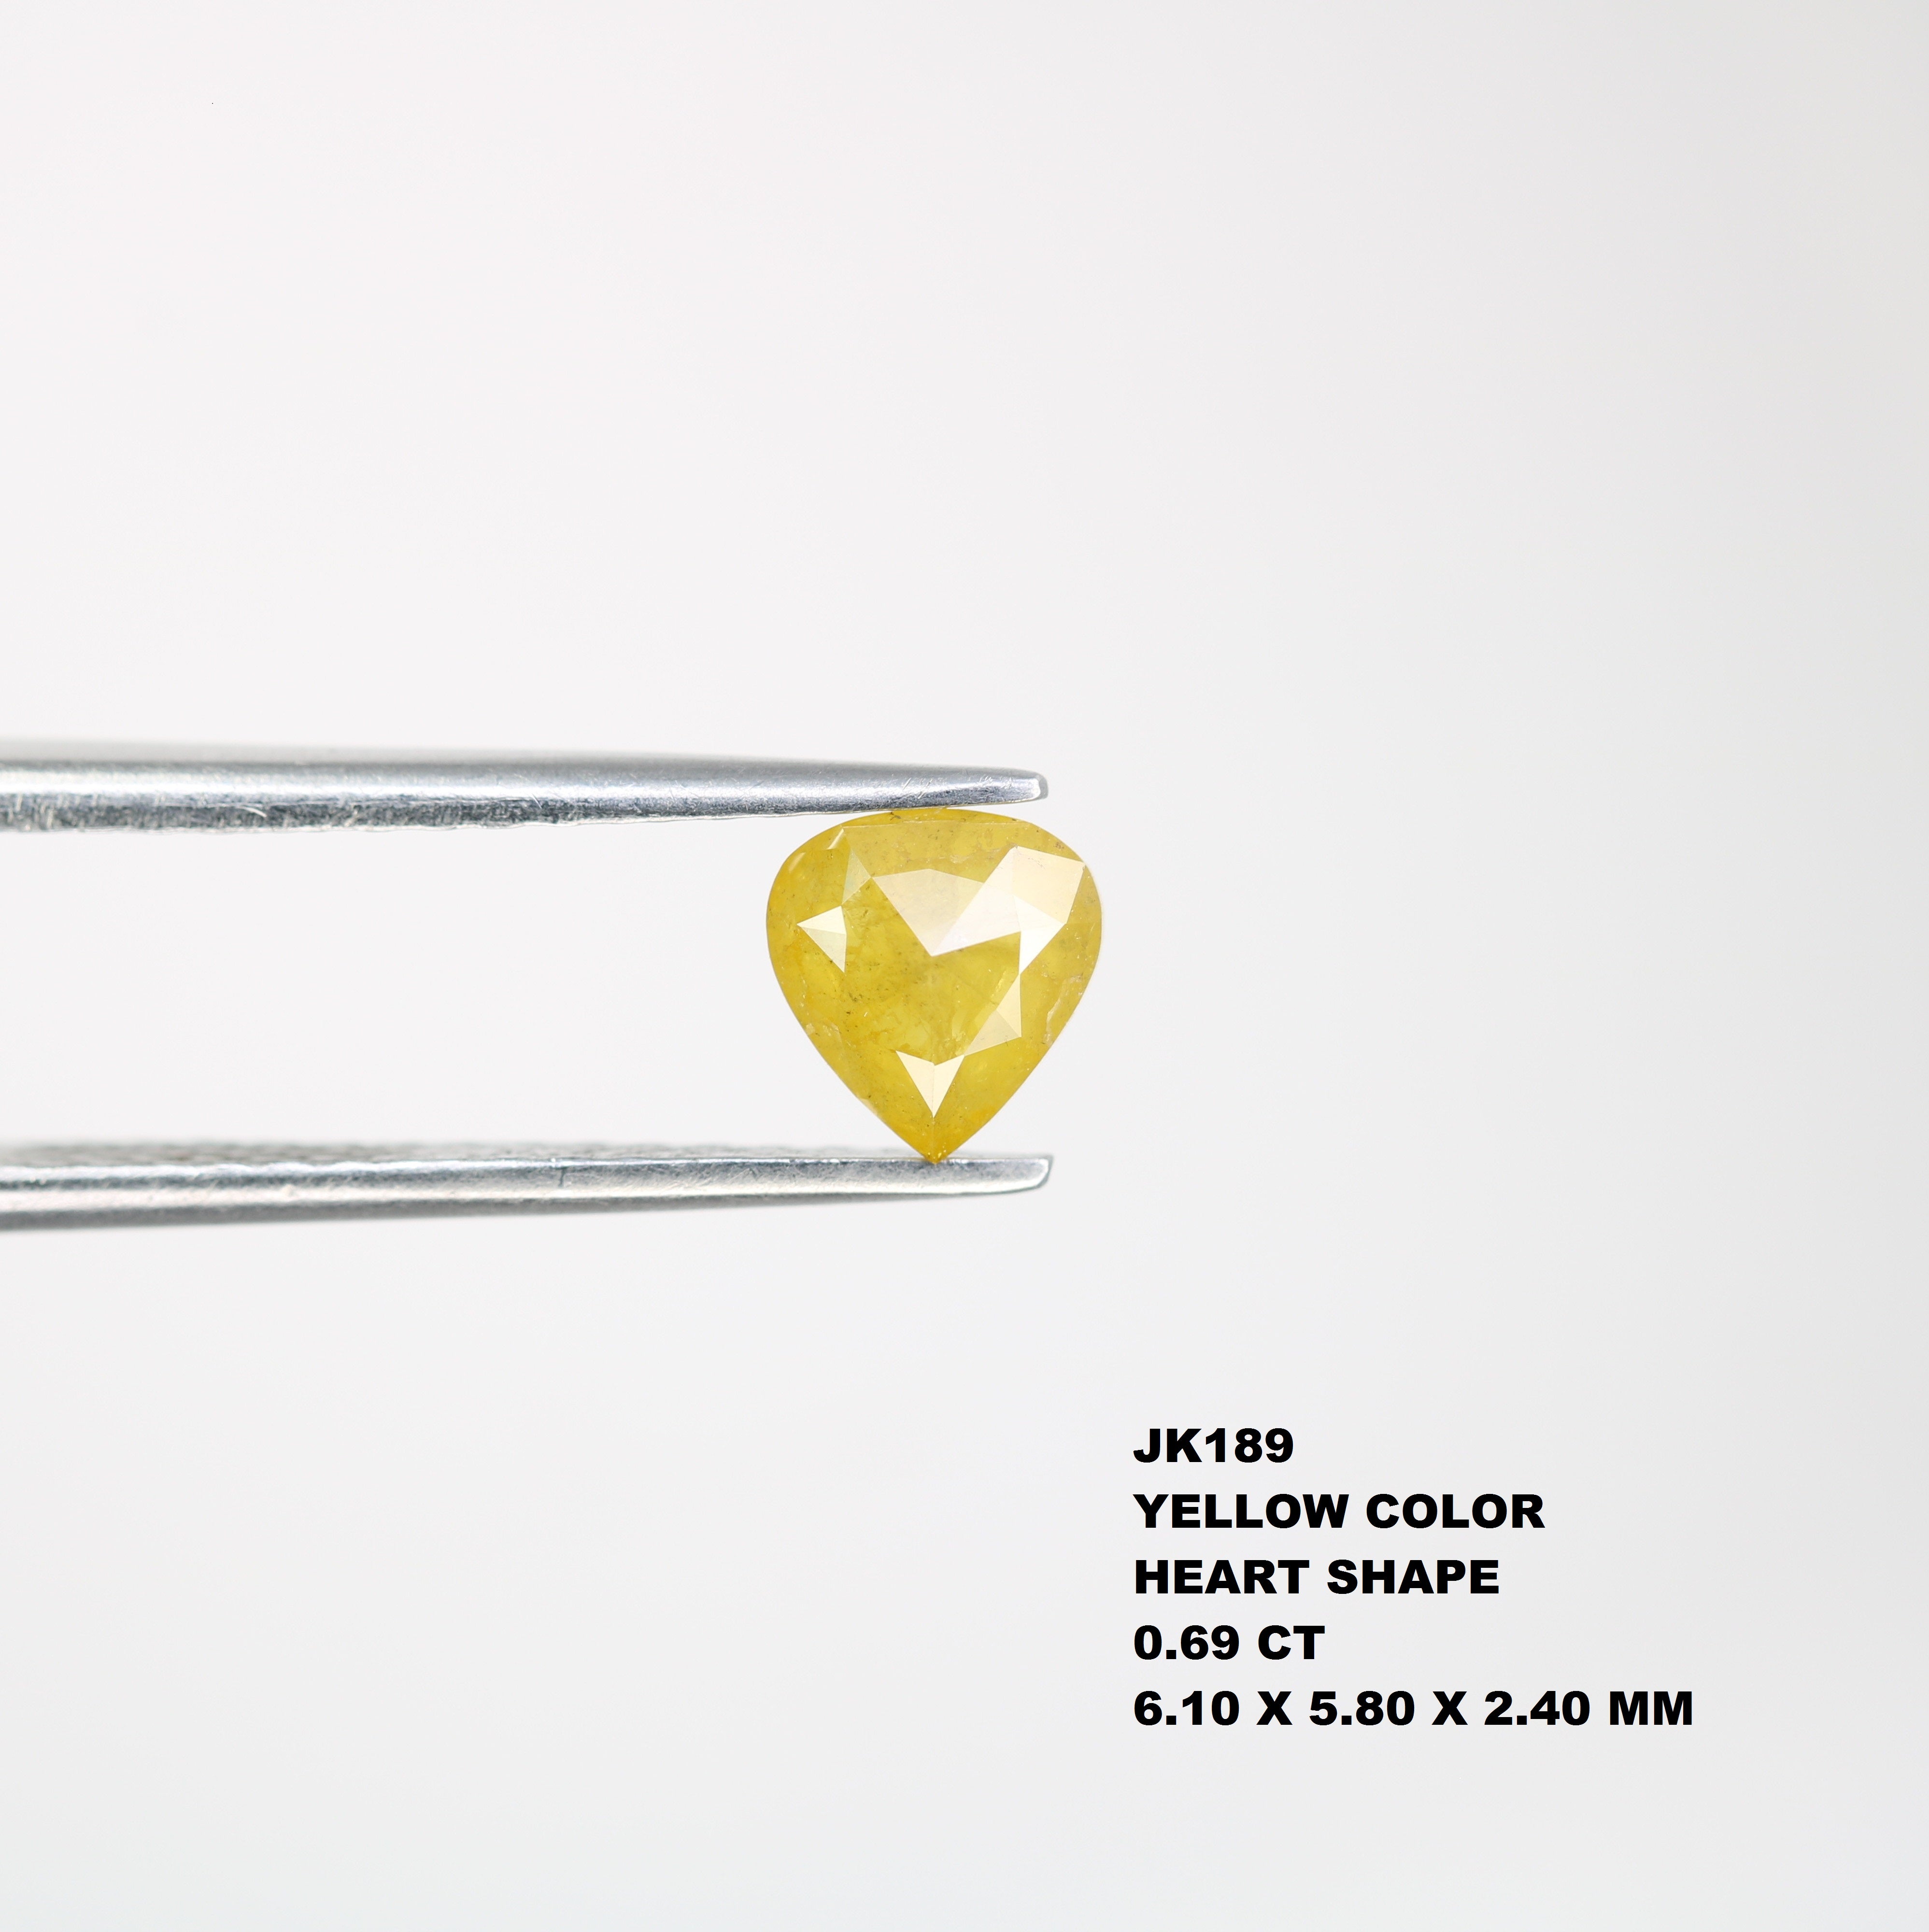 0.69 CT 6.10 MM Lovely Heart Shape Yellow Antique Diamond For Valentine Gift